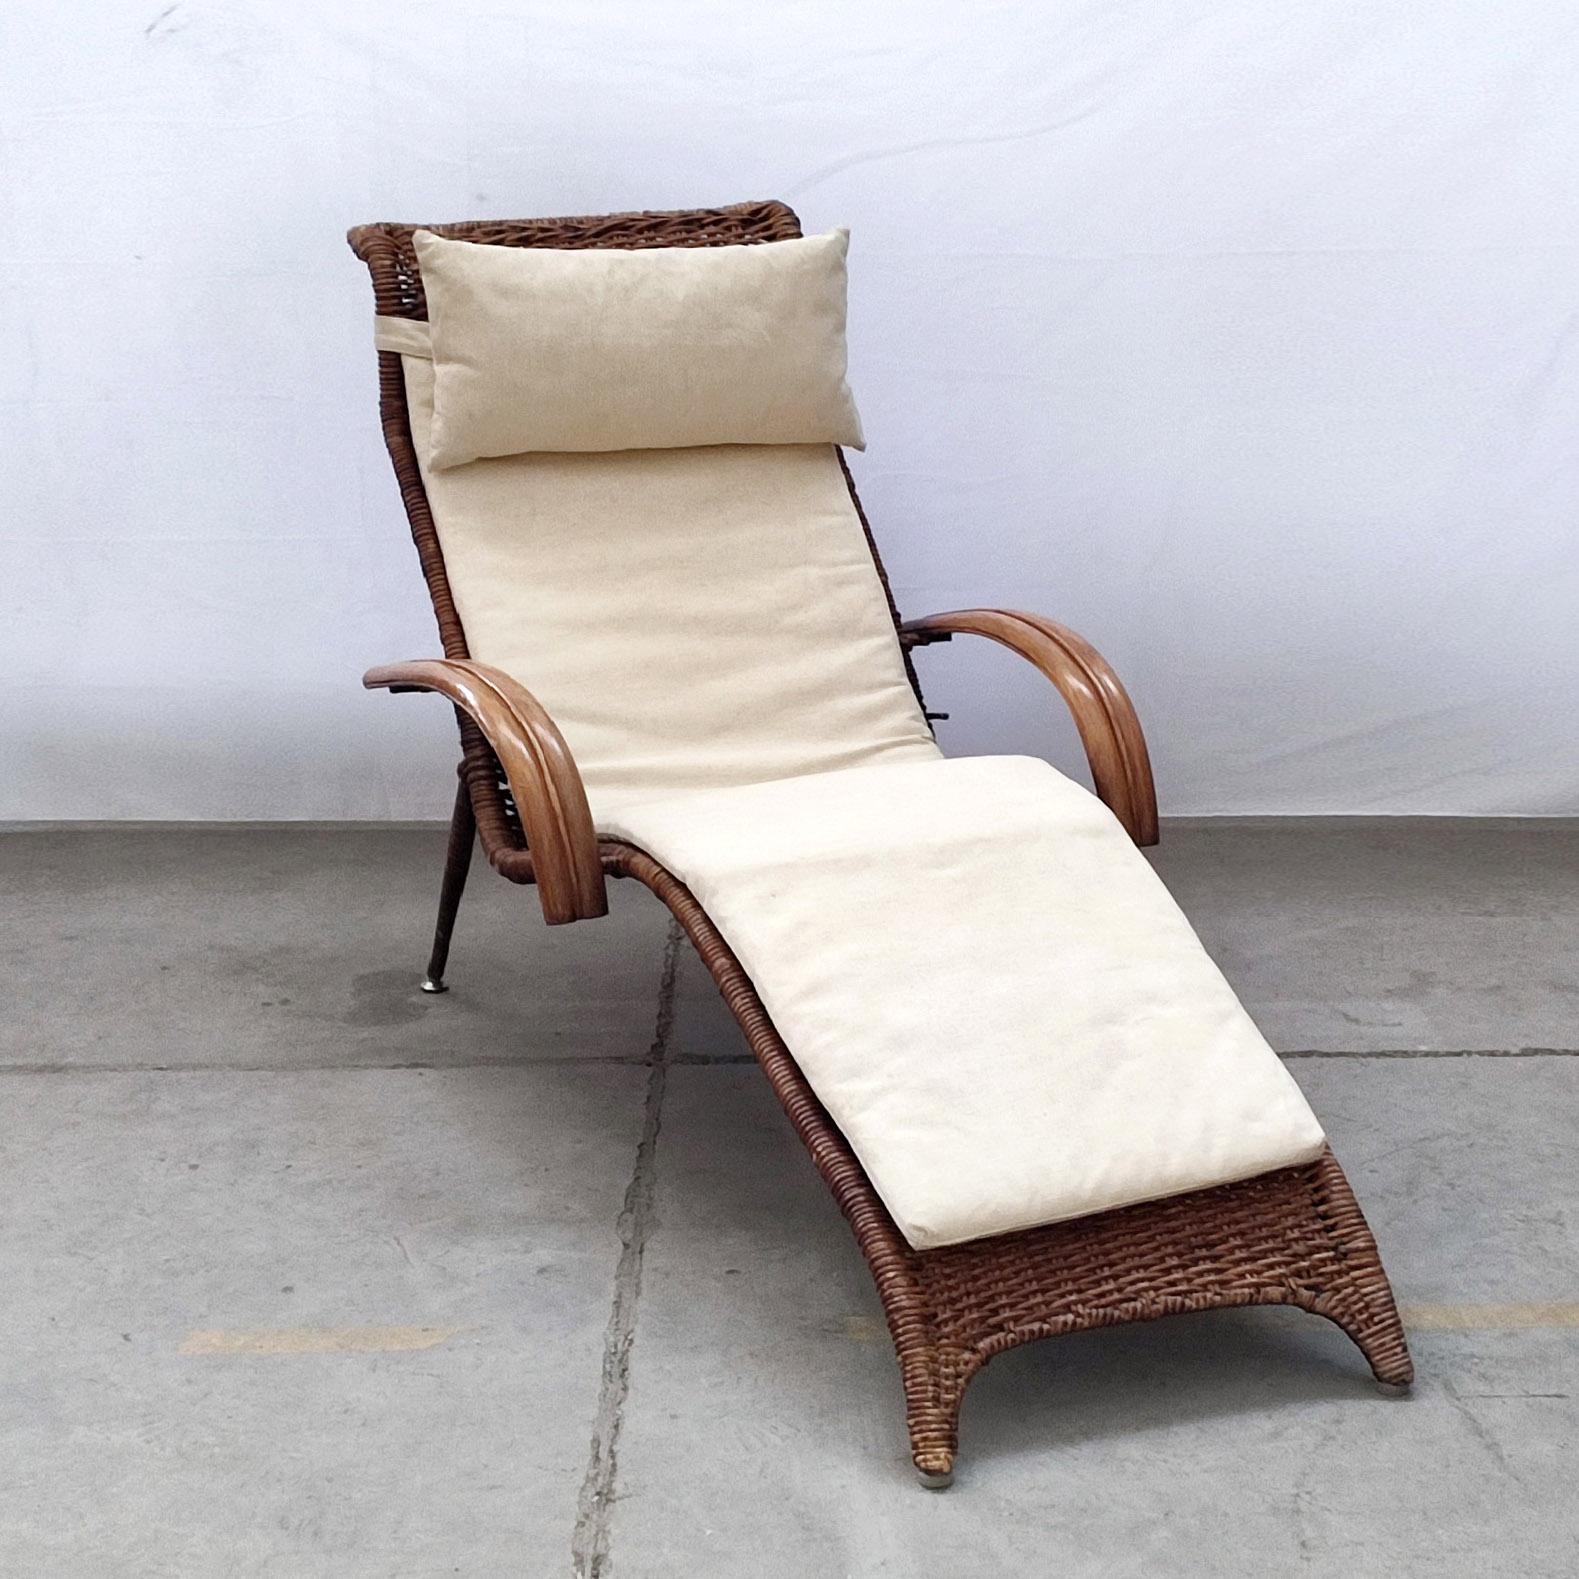 20th Century Mid-Century, Sculptural Italian Rattan and Bamboo Chaise Longue Lounge Chair For Sale